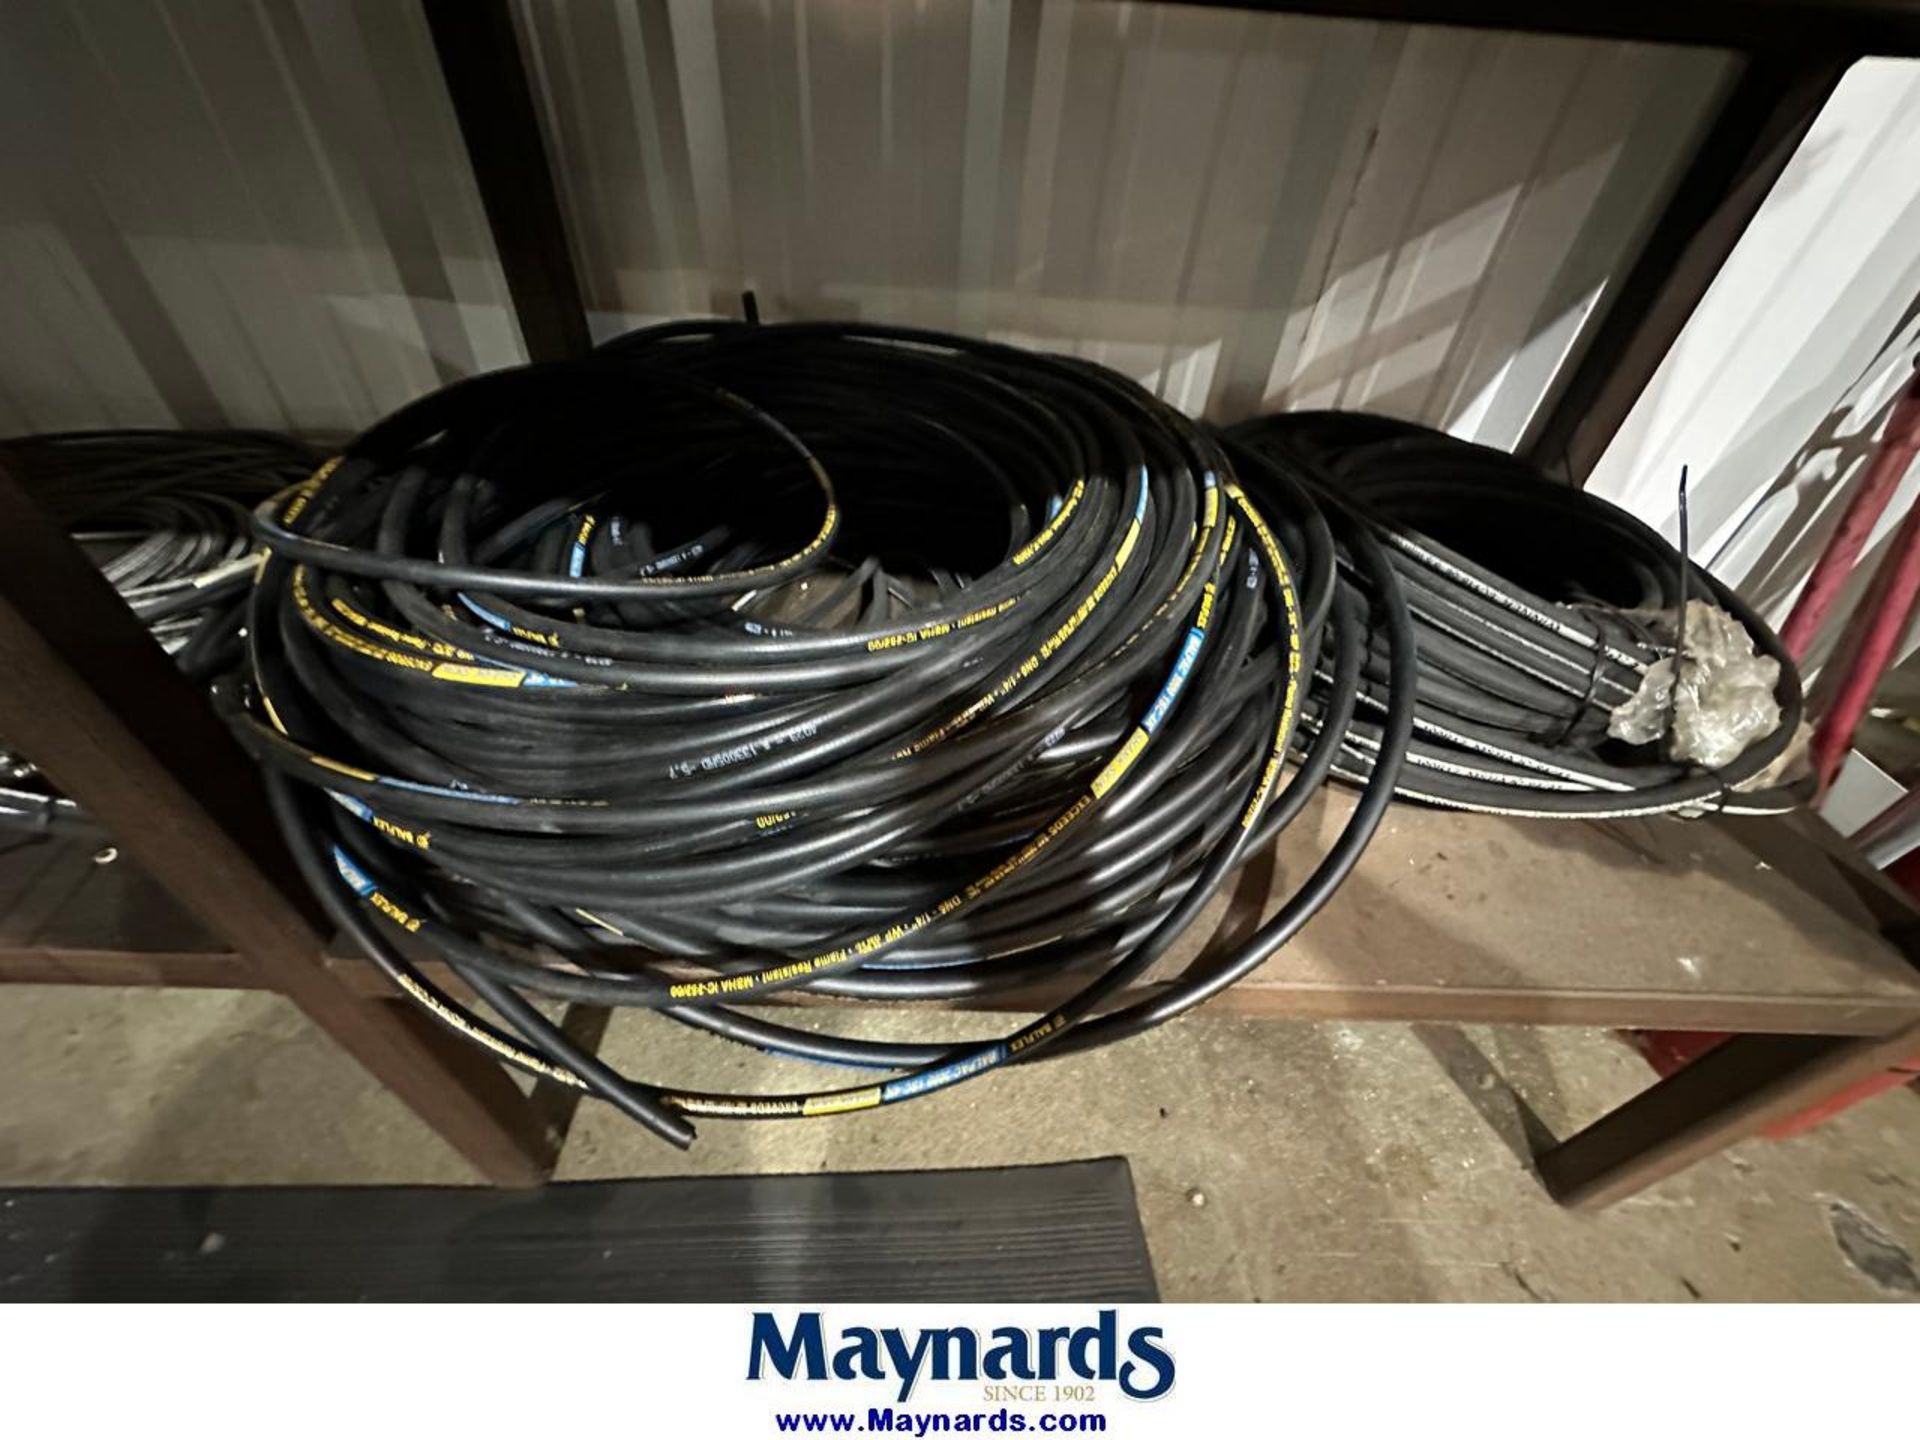 Lot of Hoses, Fittings, Steel Table and Bins - Image 3 of 7